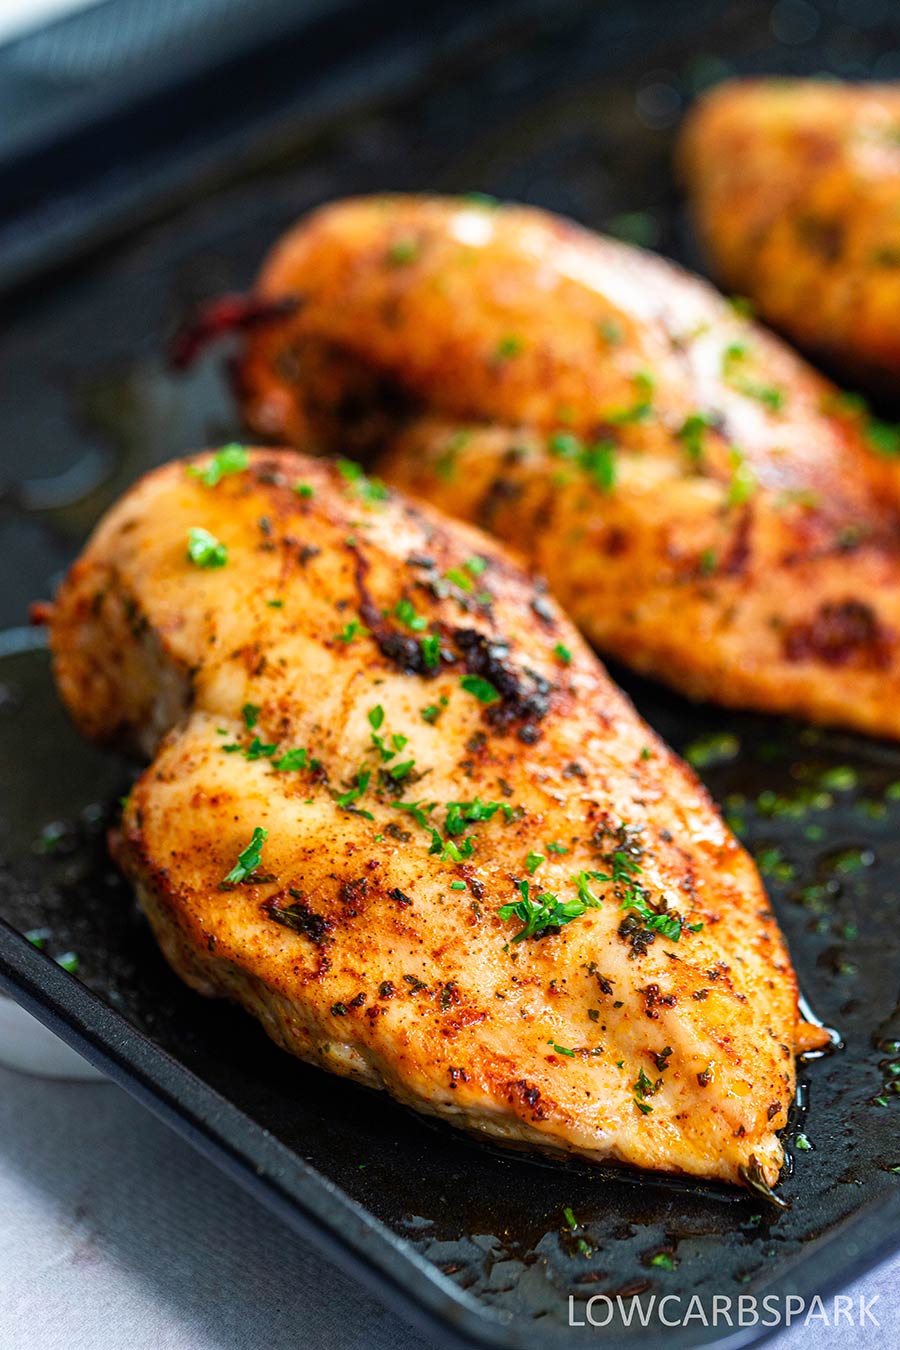 https://www.lowcarbspark.com/wp-content/uploads/2022/05/Oven-Baked-Chicken-Breast-1.jpg